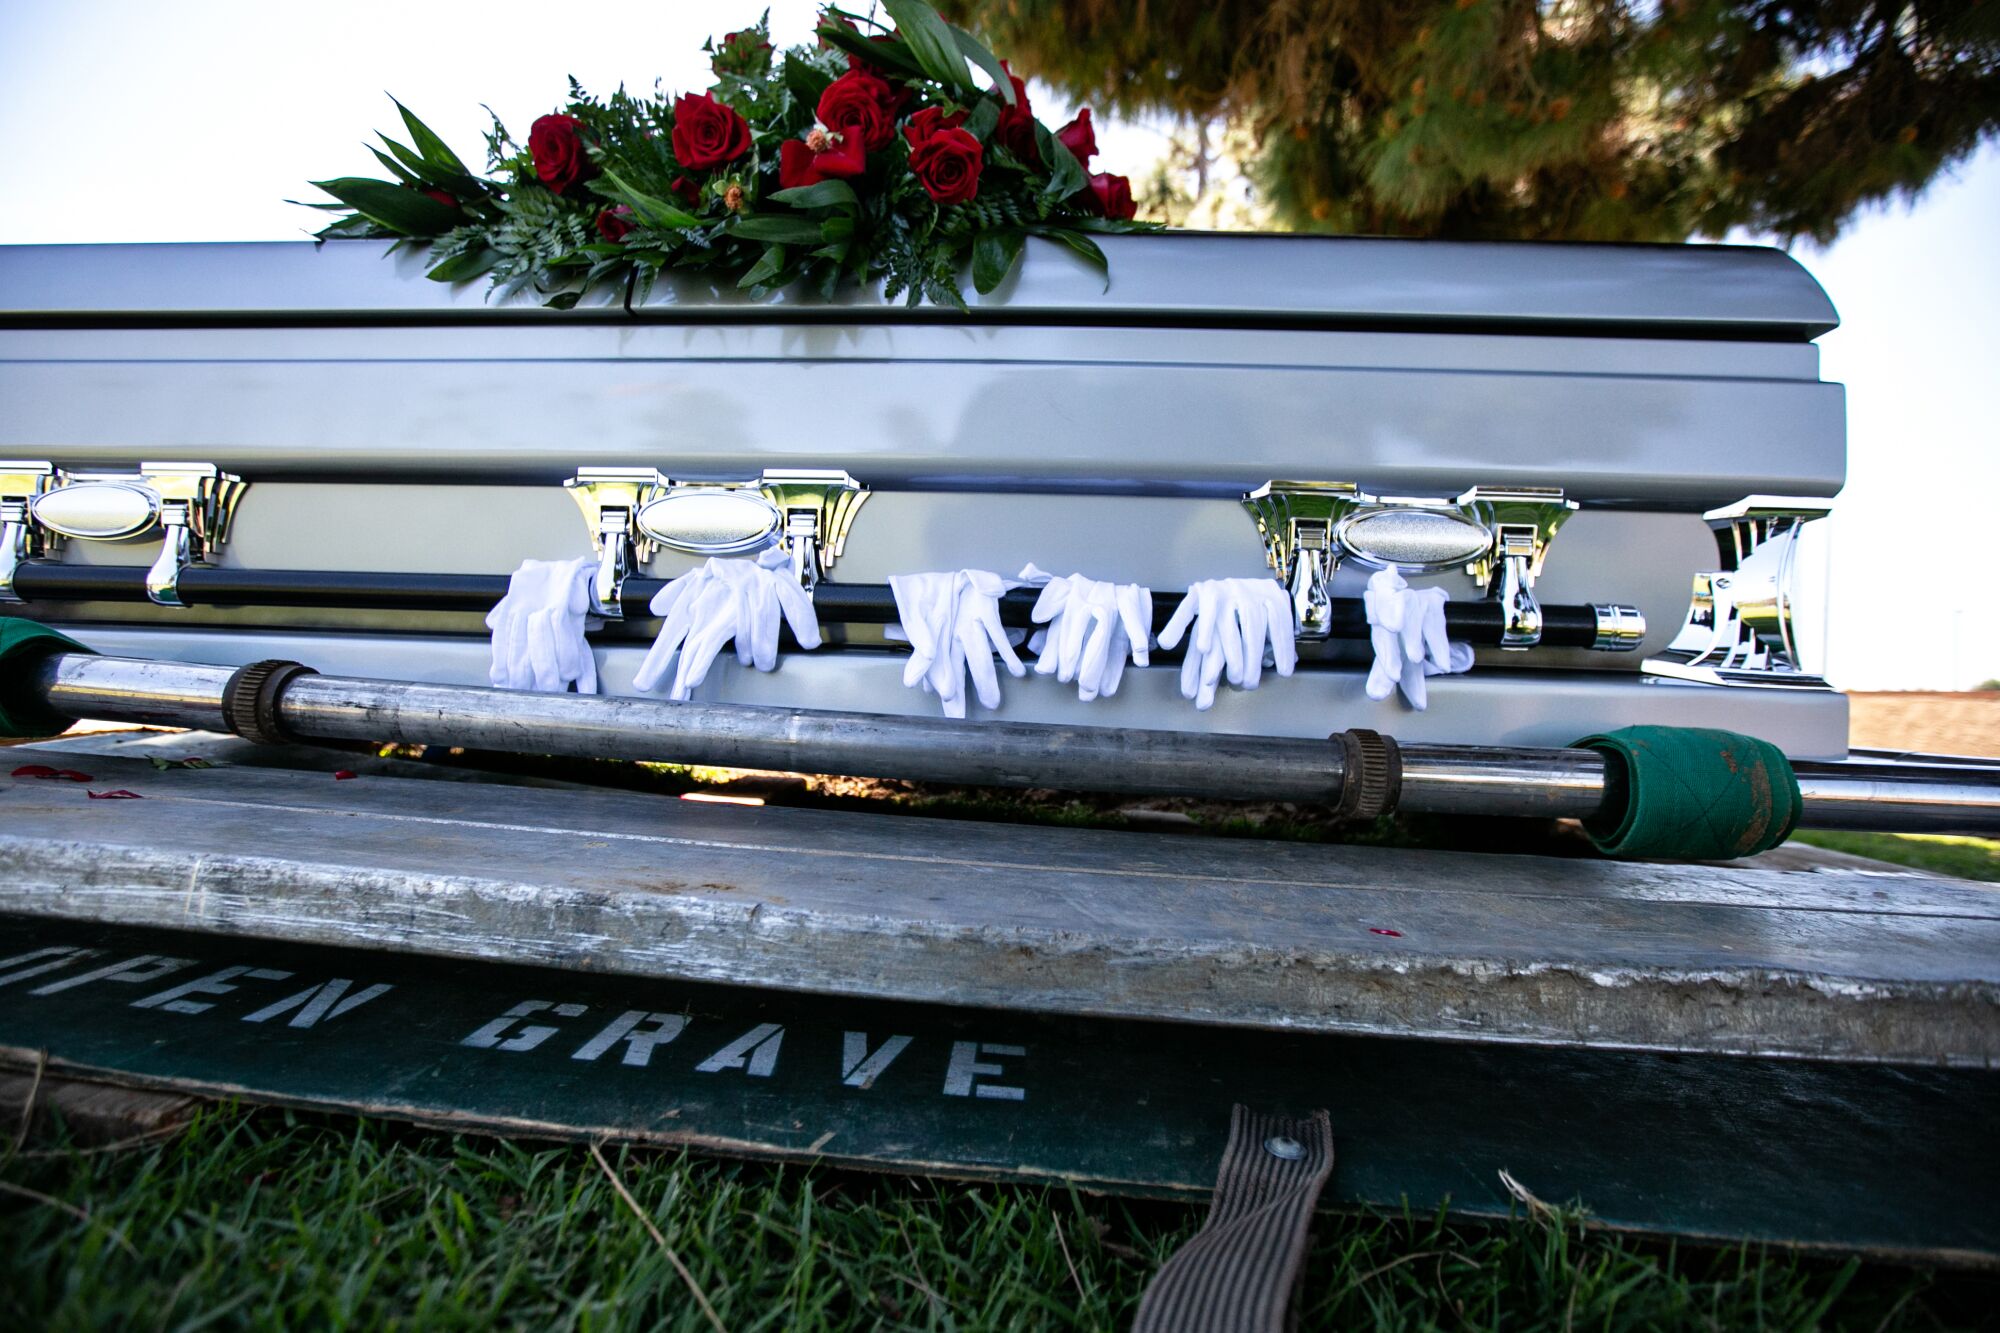 Gloves worn by pallbearers are draped on the casket of Charles Jackson Jr., who died of COVID-19, on April 15 at the Inglewood Park Cemetery in Los Angeles.